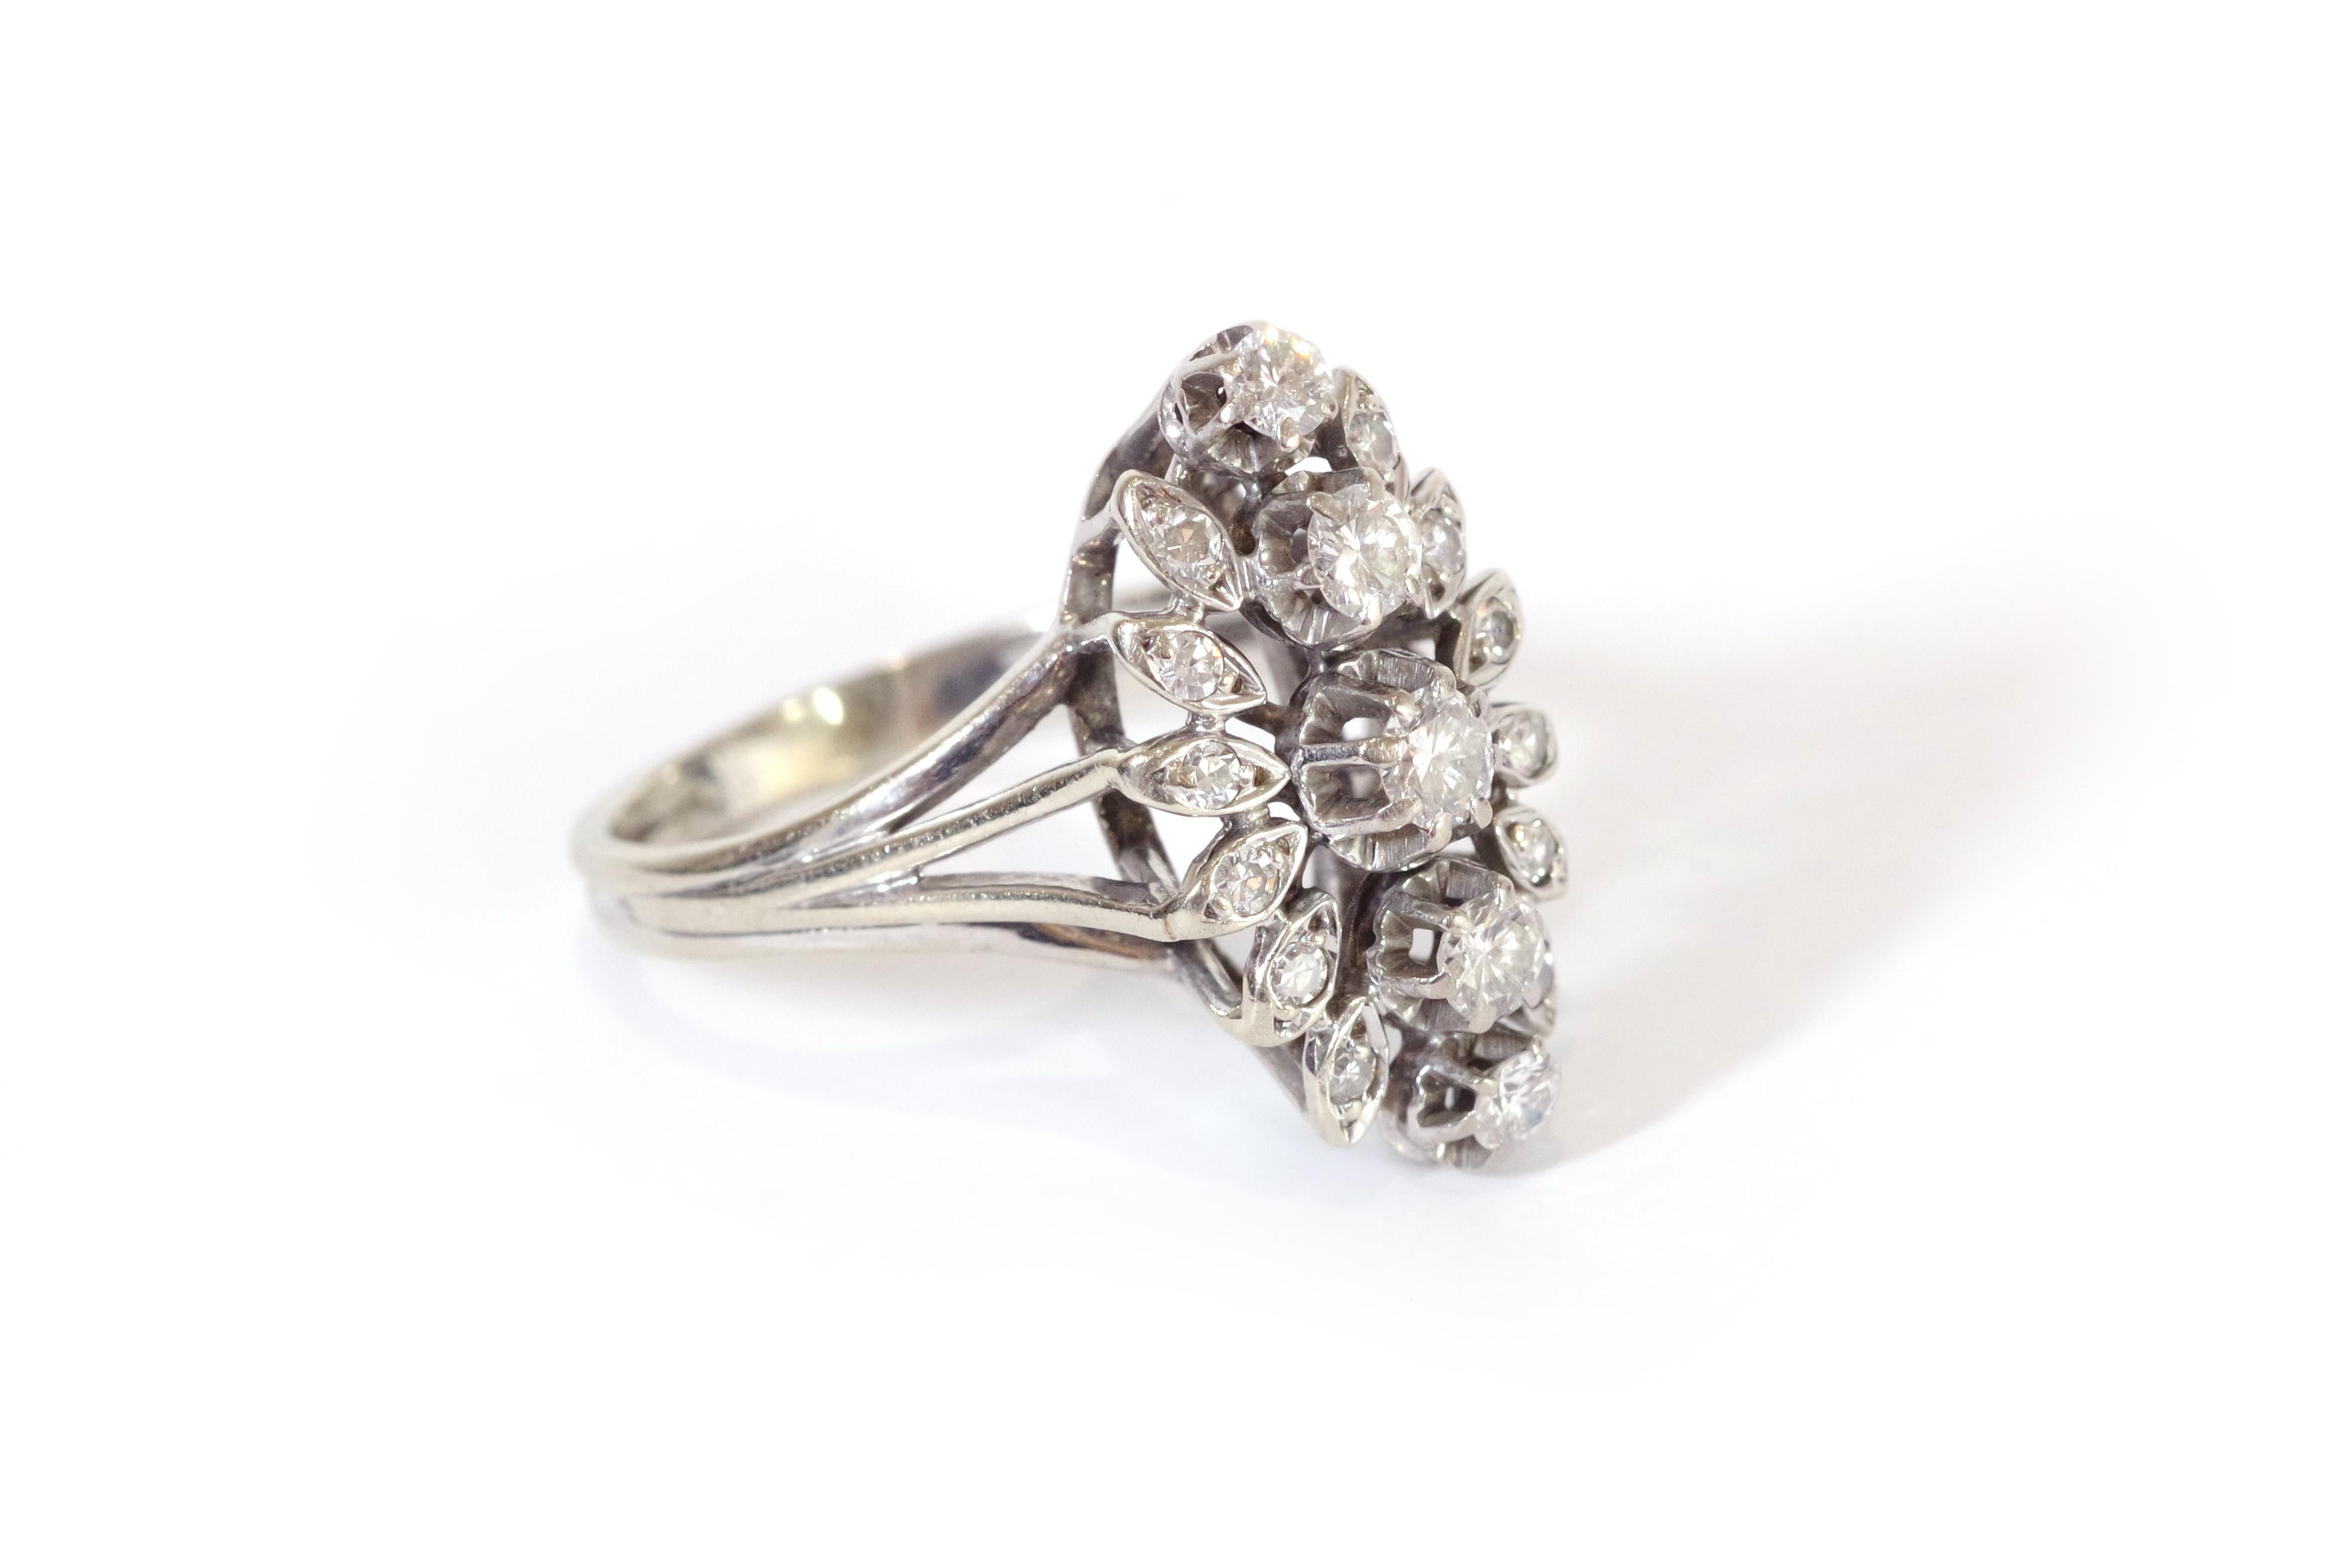 Navette diamond ring in 18 karat white gold. The ring is set with a line of five brilliant-cut diamonds, surrounded by twelve brilliant-cut diamonds, set in a leaf motif. The bezel is quite high. Marquise cluster ring from the 1970s. 

Owl hallmark